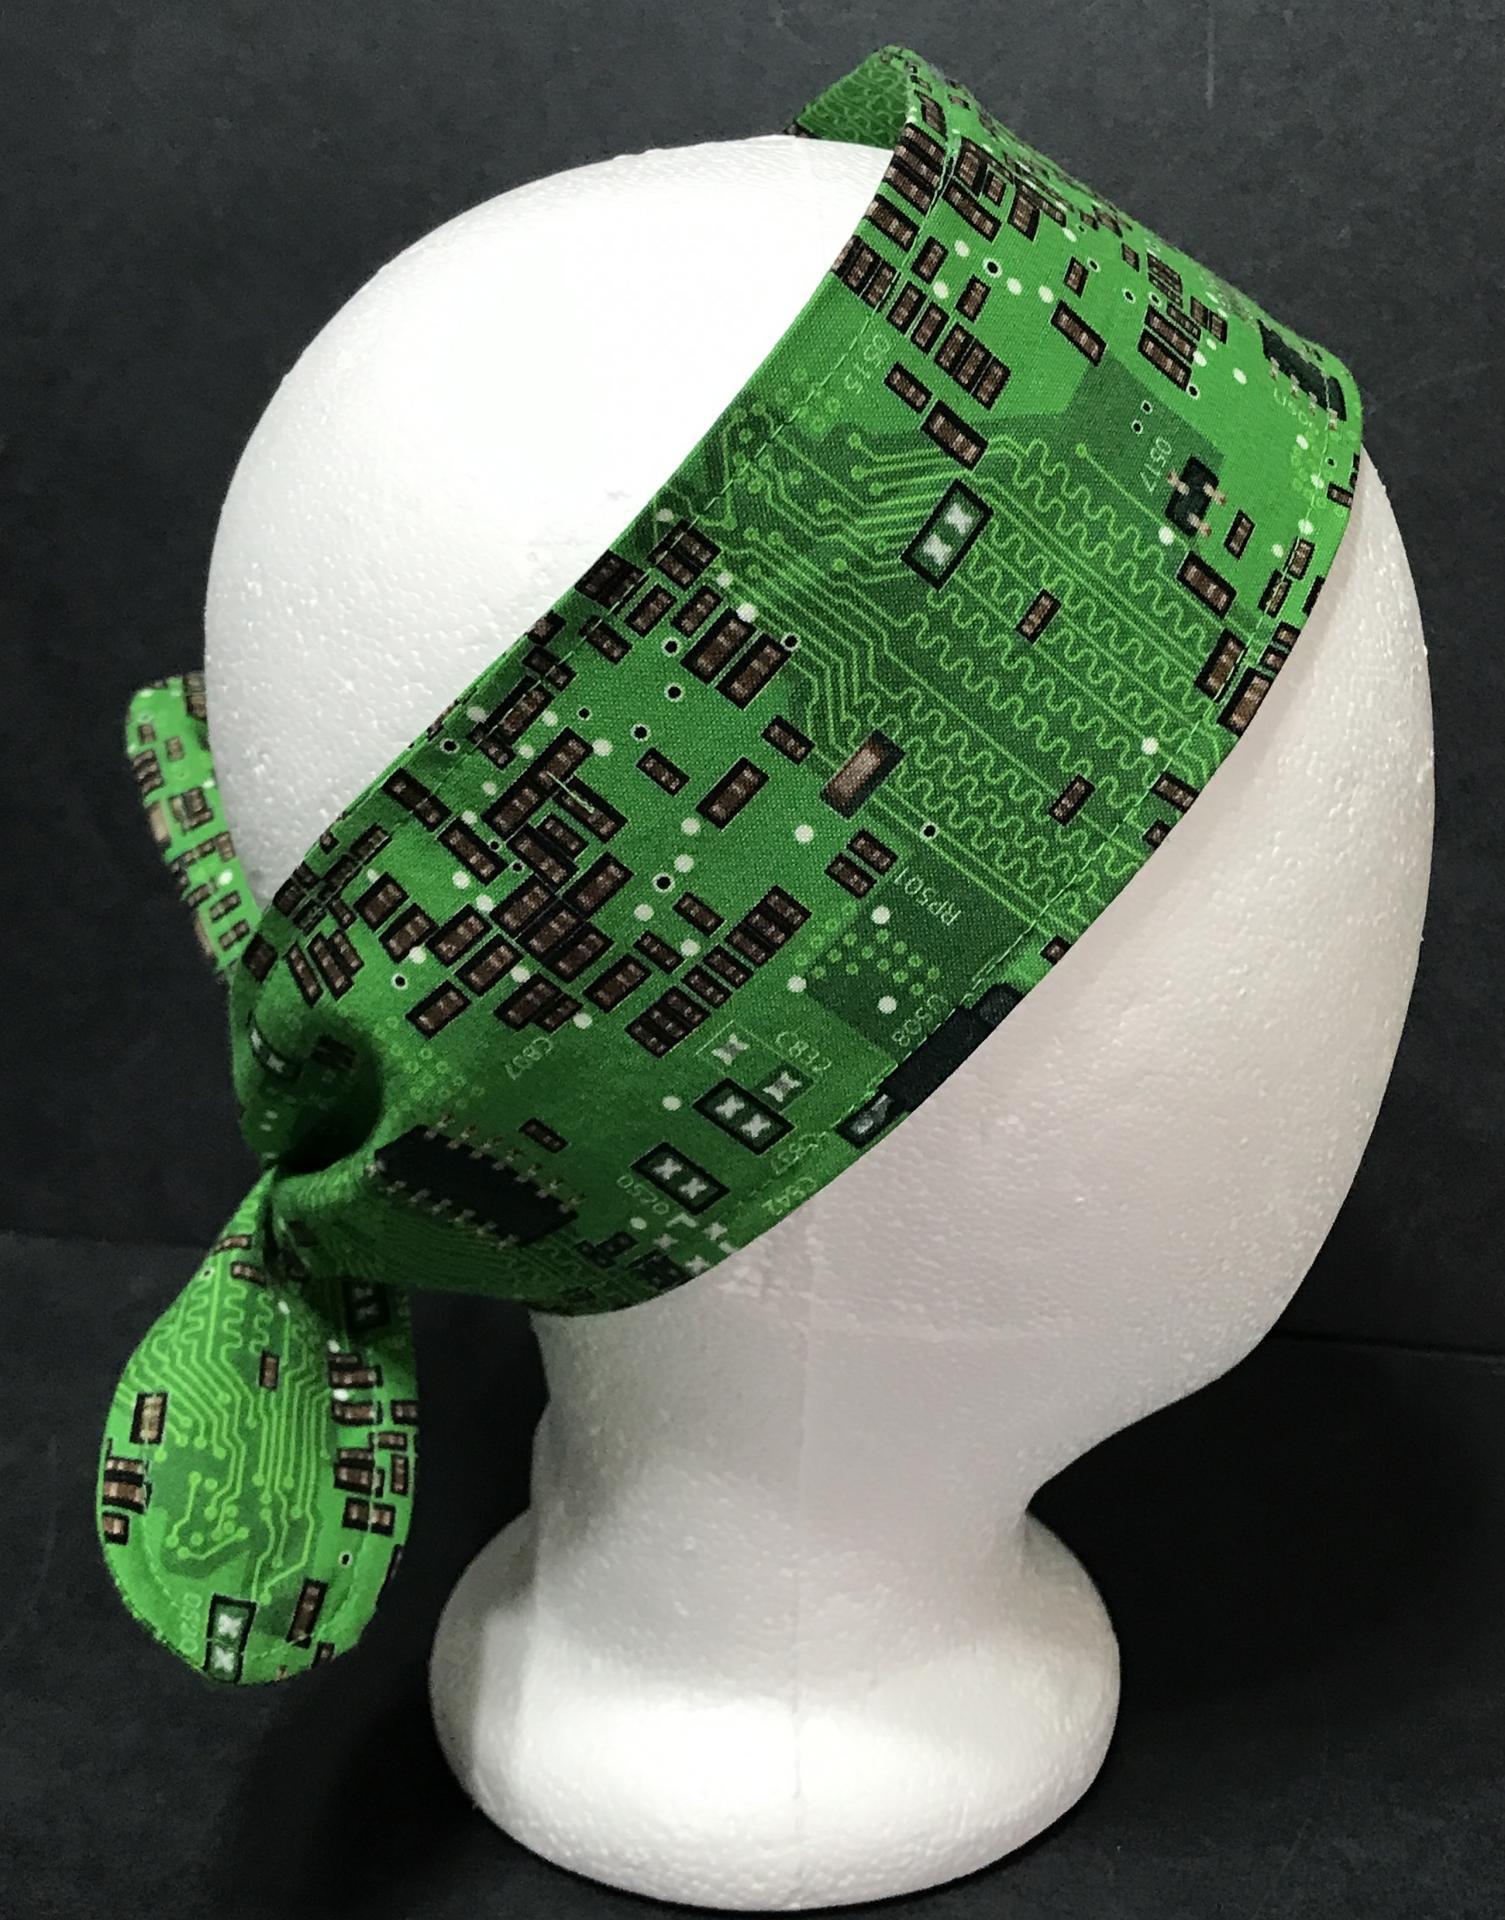 3" Wide green printed circuit board fabric head scarf, tied in back